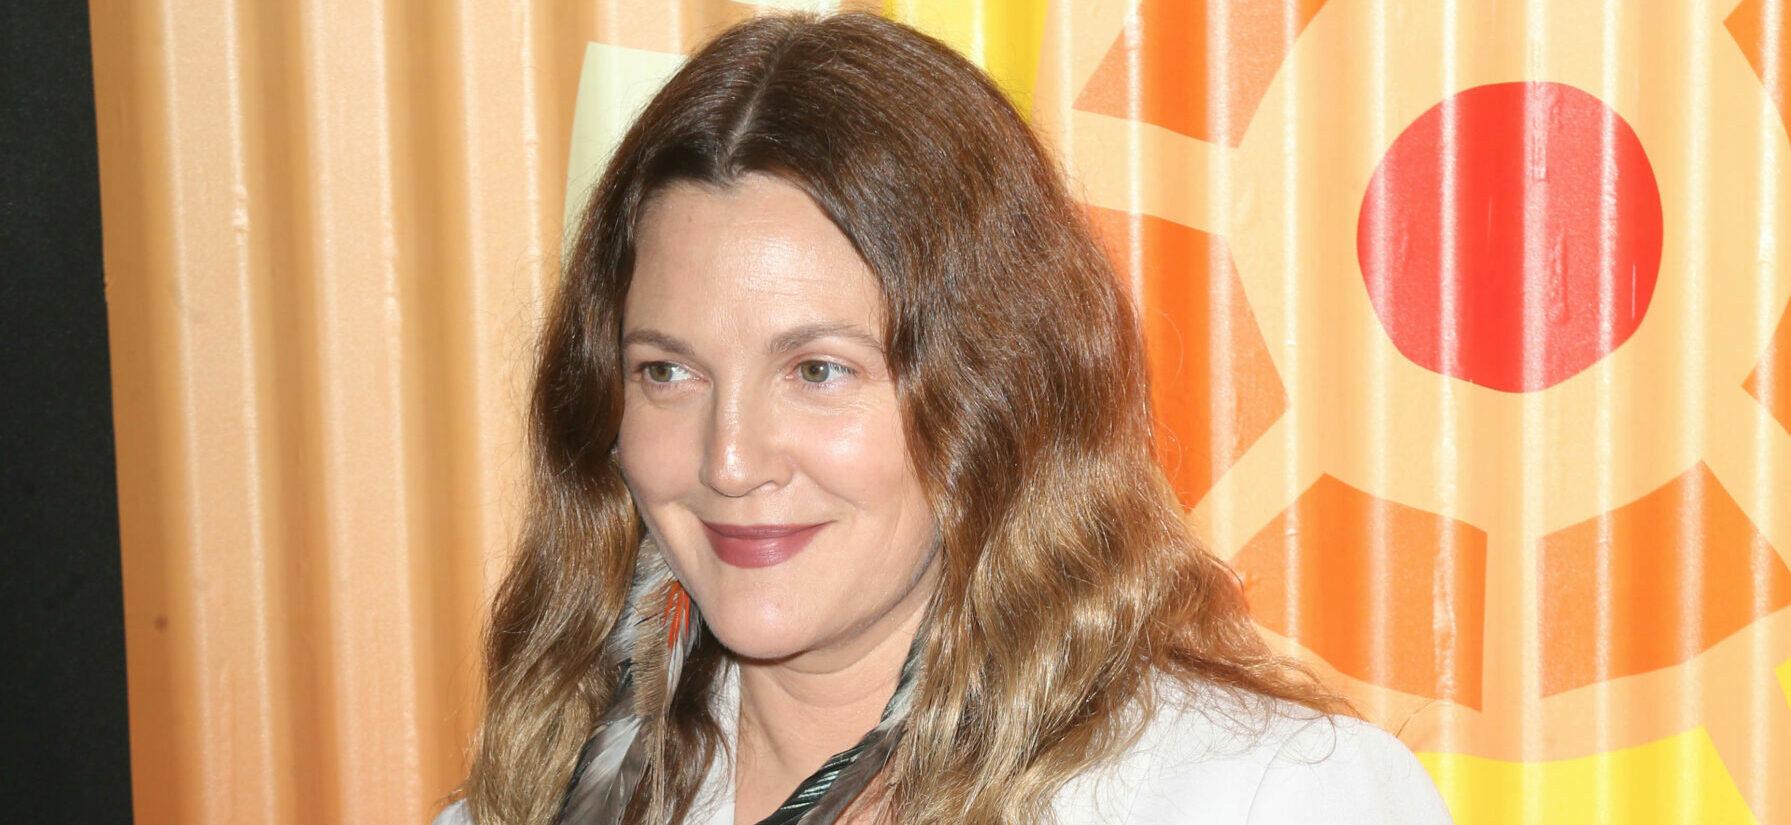 Drew Barrymore Reveals Struggle With Alcohol After Her Divorce From Will Kopelman